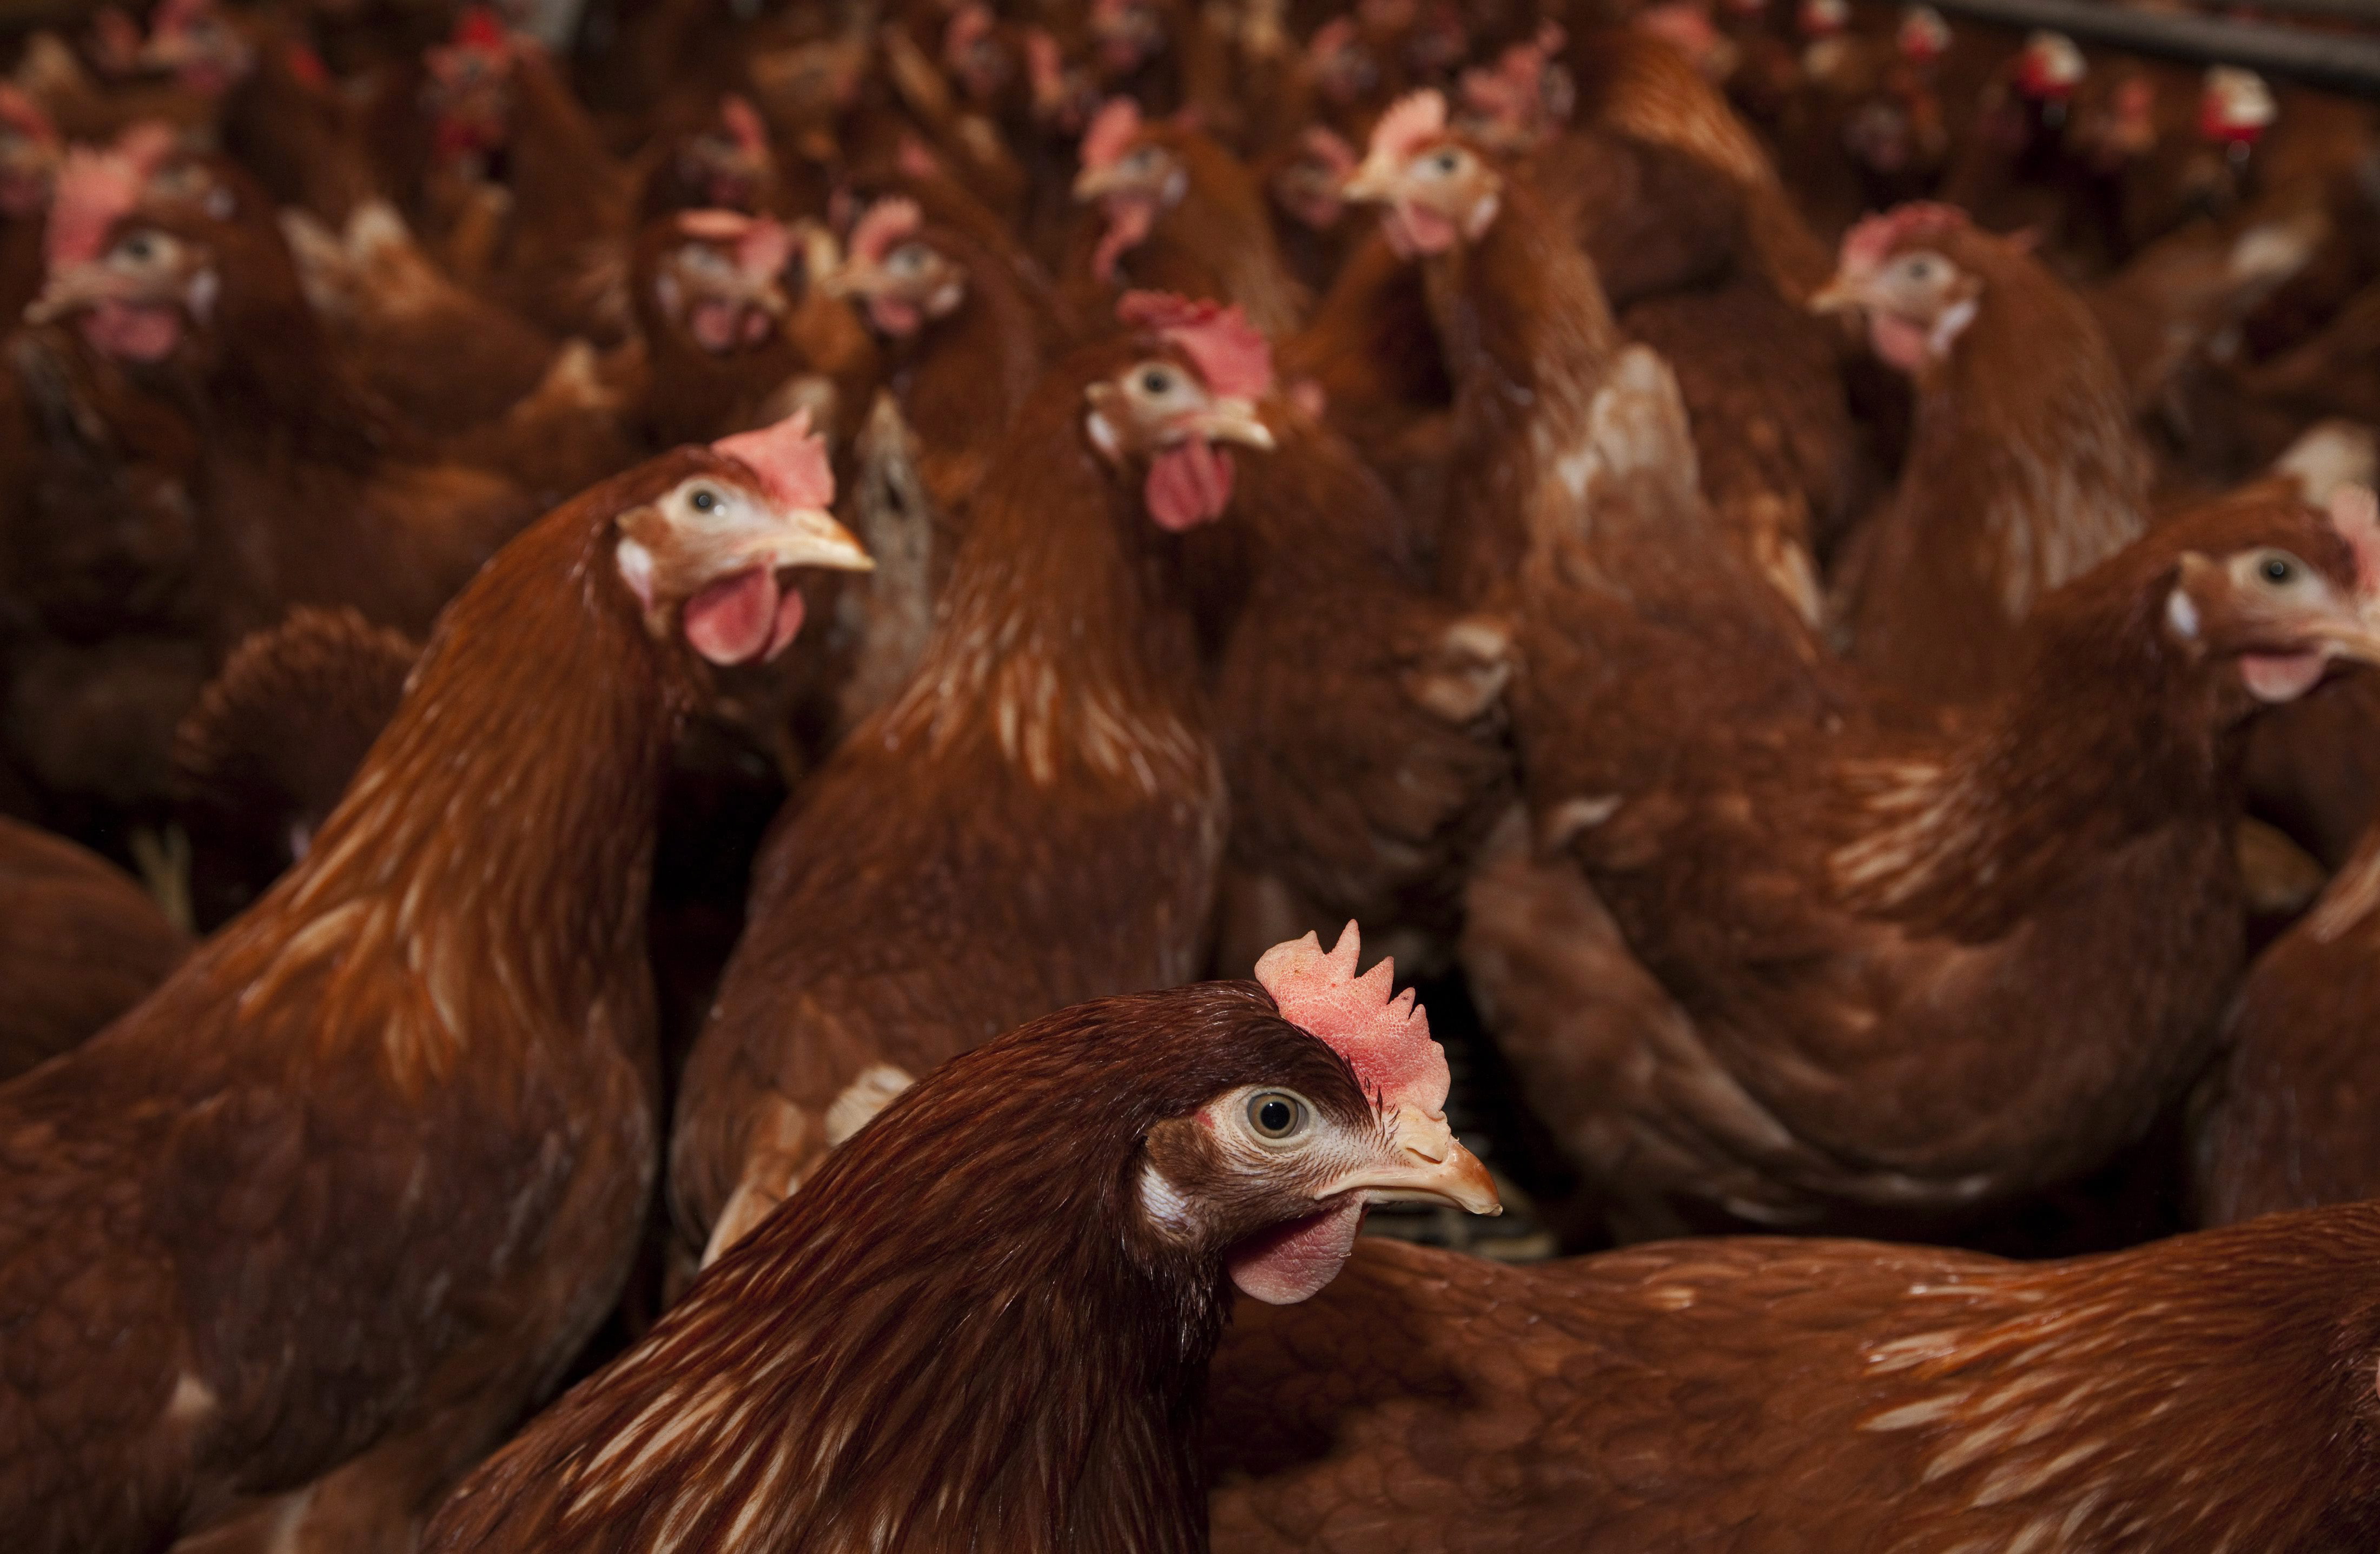 Avian flu: More than 3M birds affected in Canada amid global outbreak